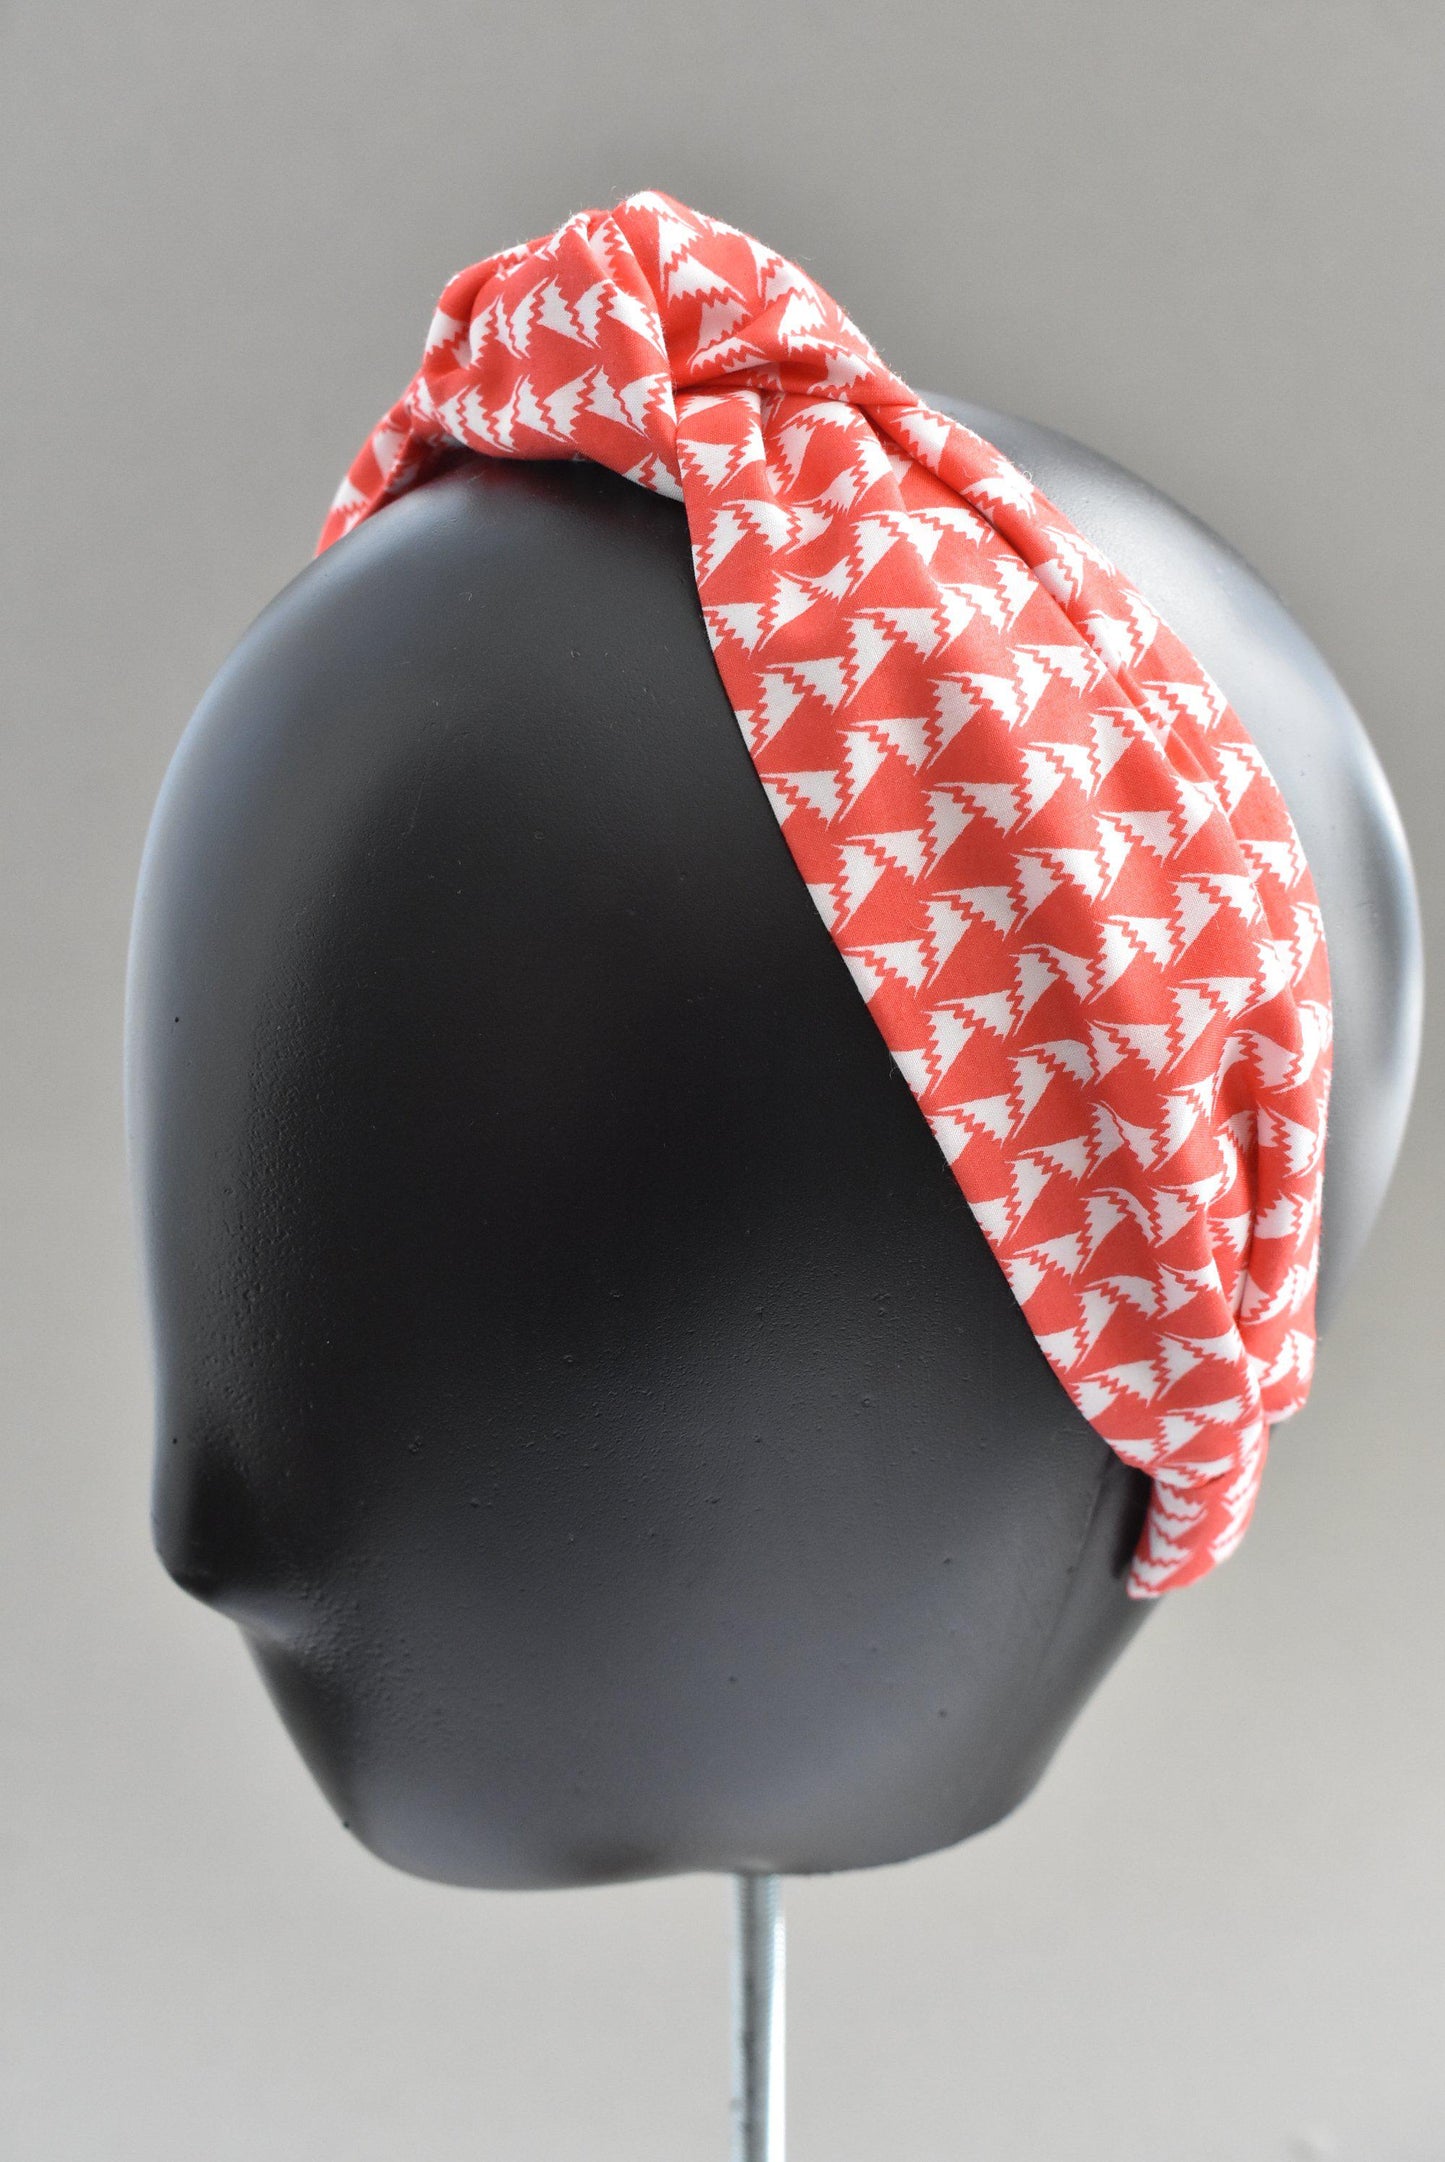 Ladies Knot Alice band - Liberty of London Jonathan red & white print